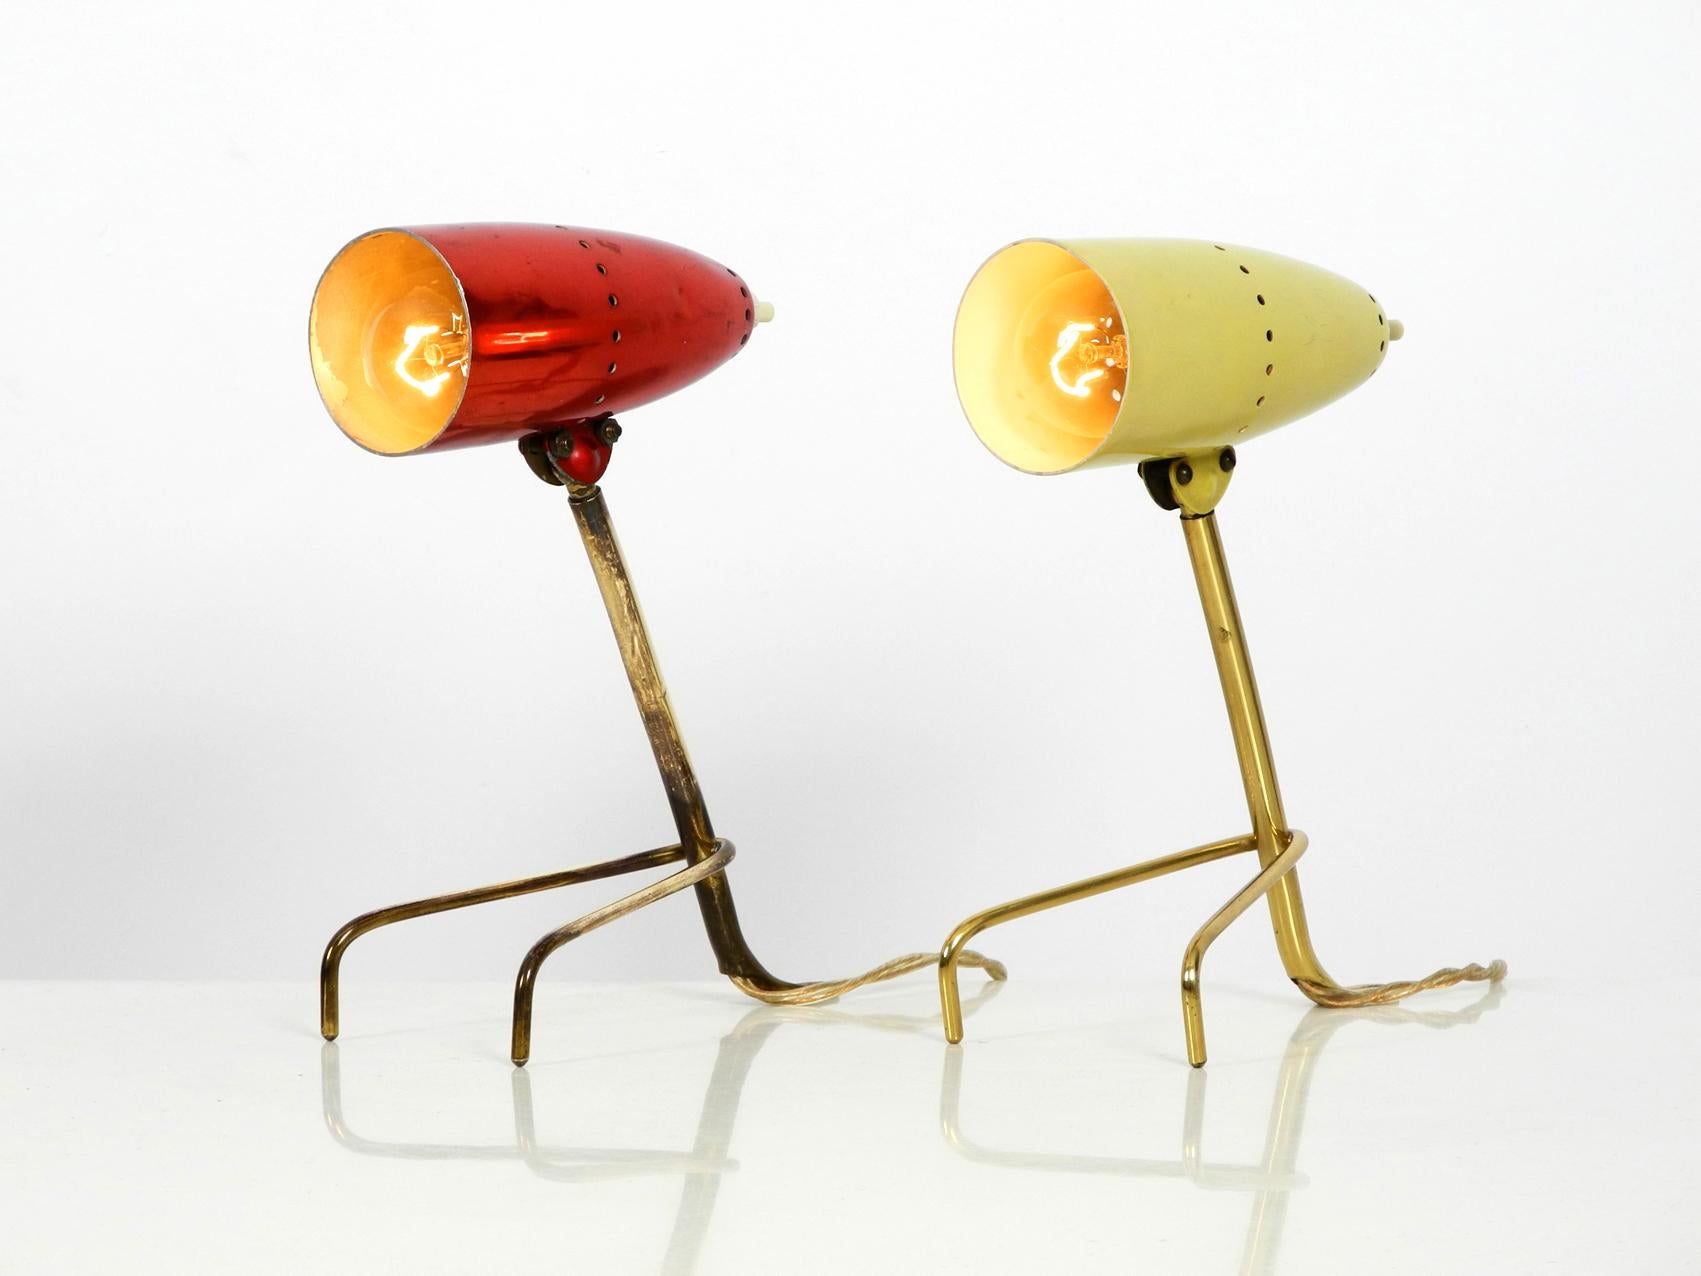 Austrian Stunning Pair of Mid-Century Modern Brass Crowfoot Table Lamps, Made in Austria